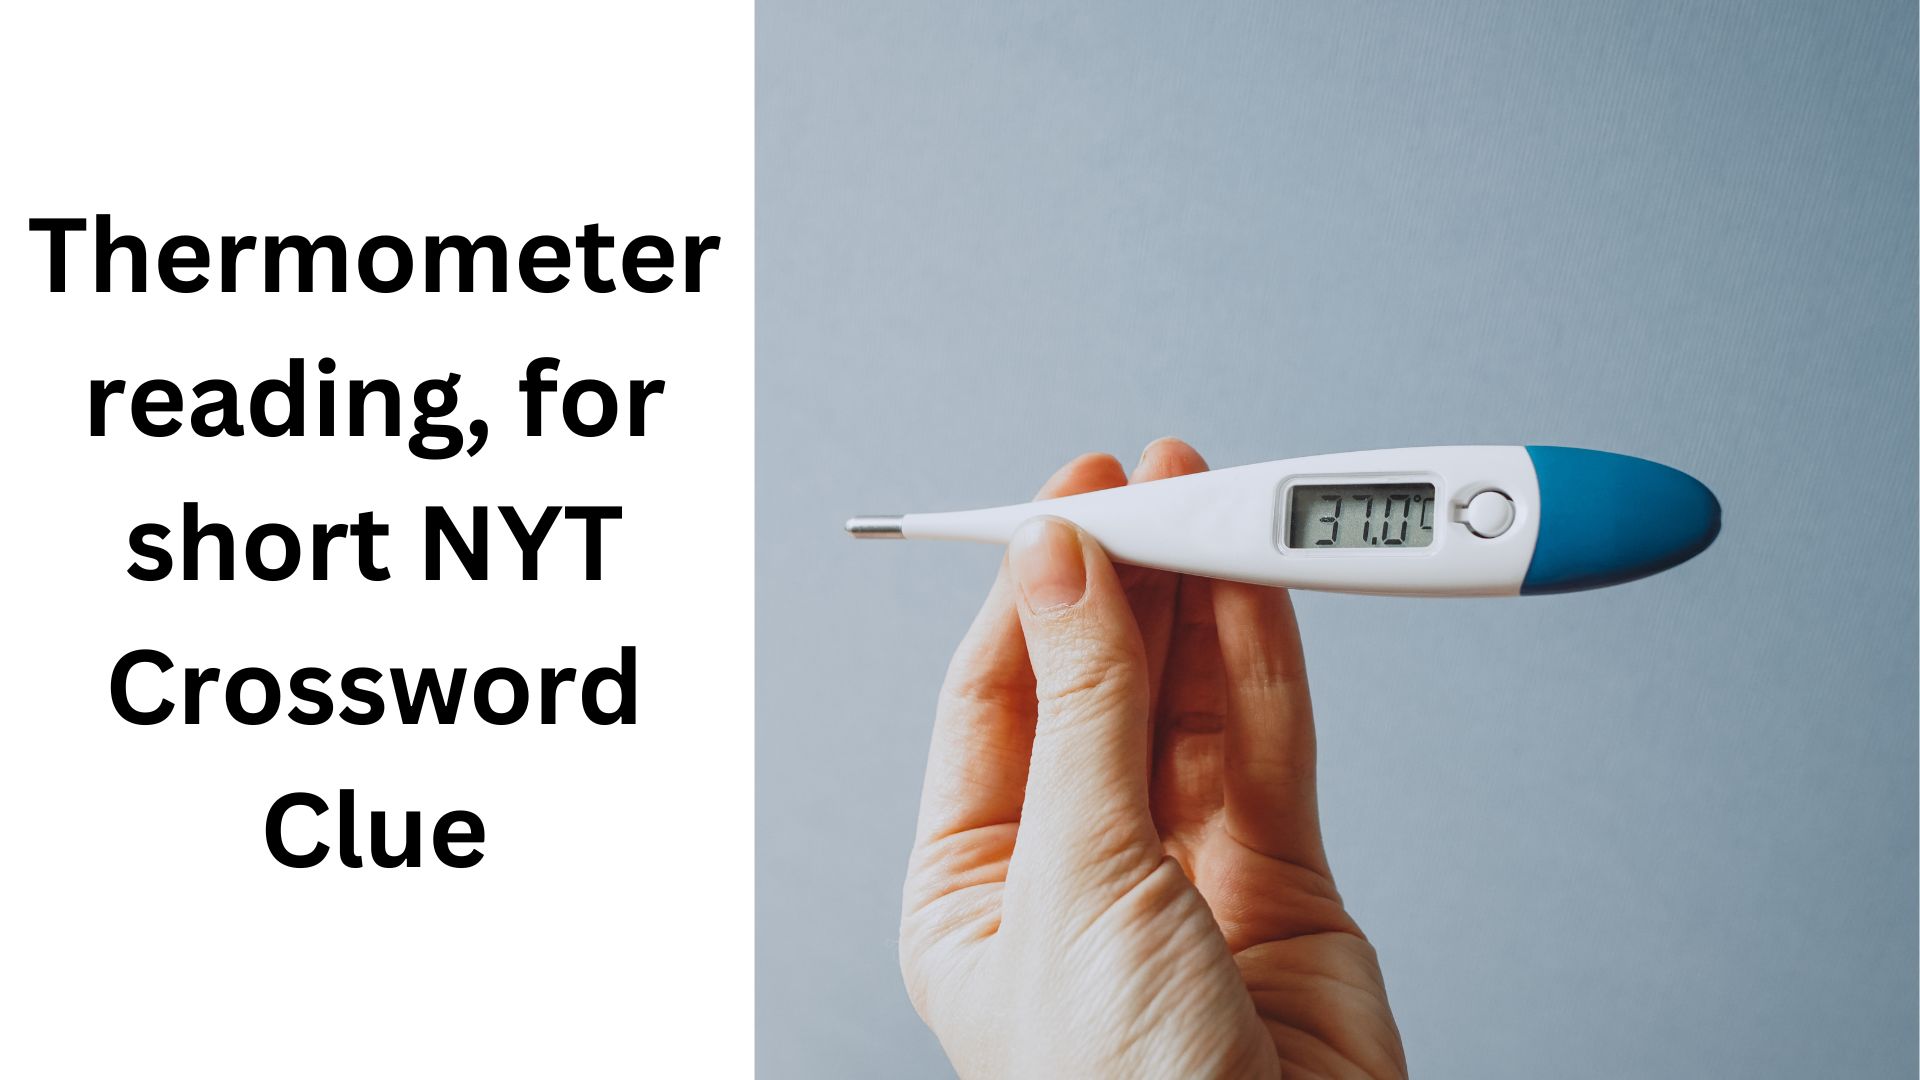 Thermometer reading, for short NYT Crossword Clue